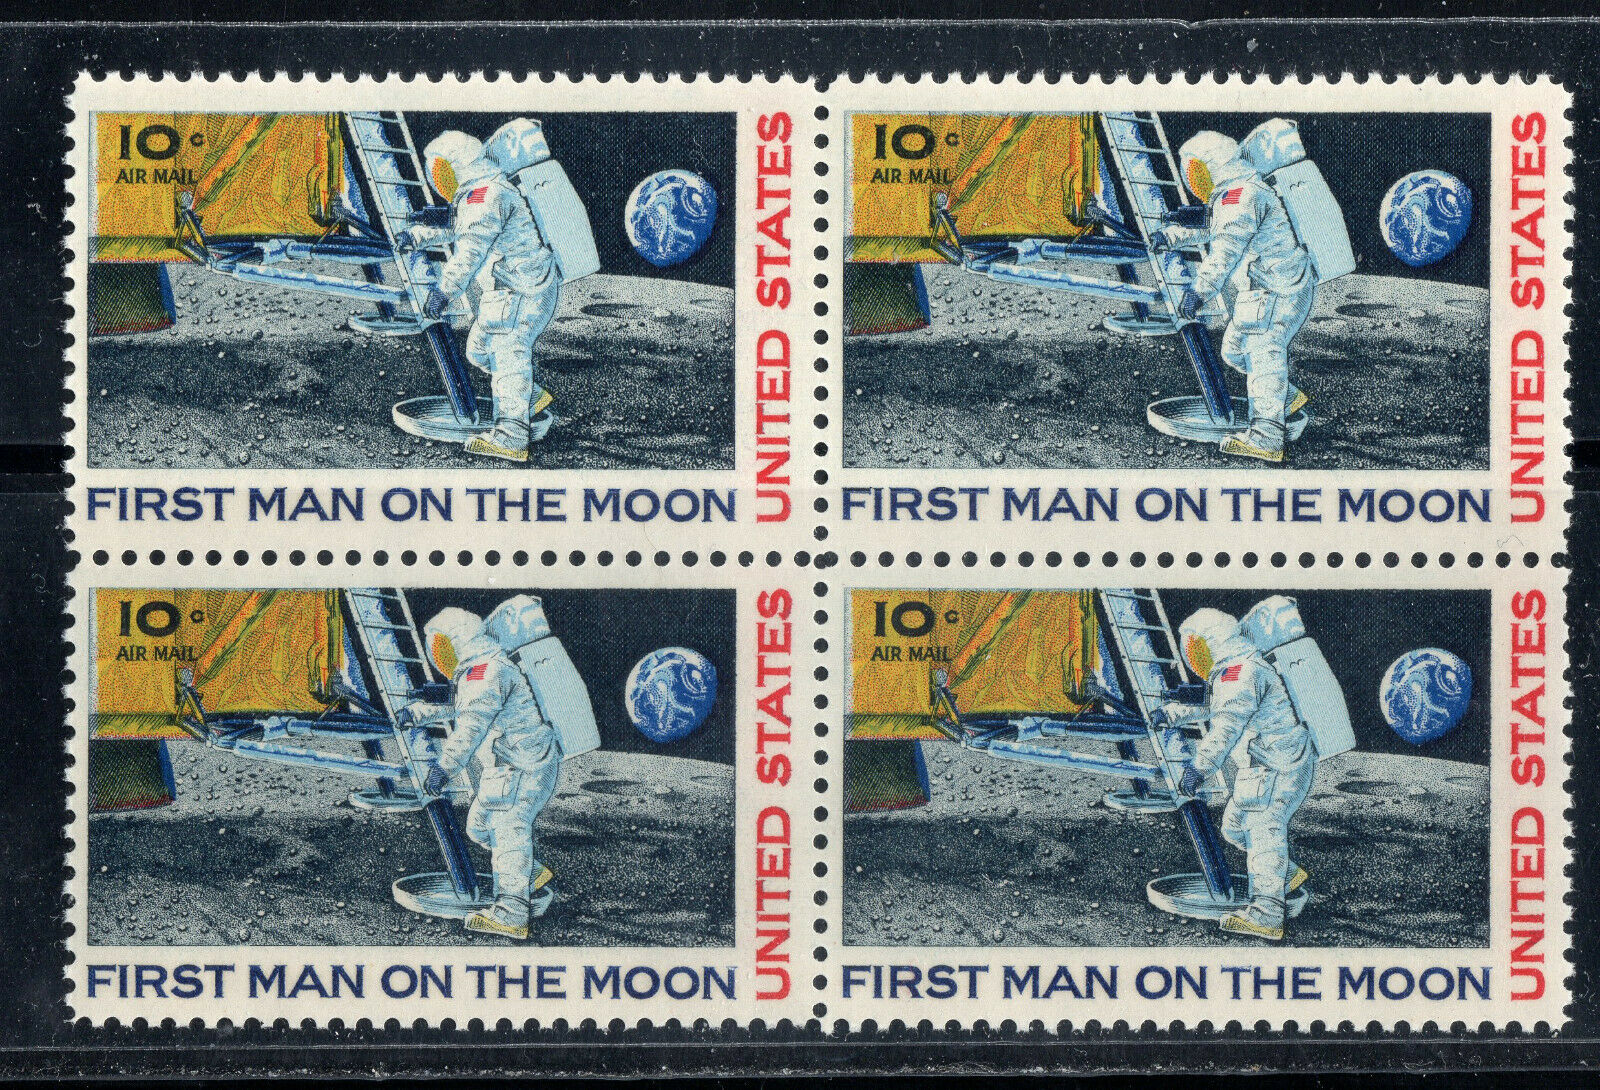 First Man On The Moon ** 1969 Apollo 11 * Vintage U.s. Postage Stamps Block Mint